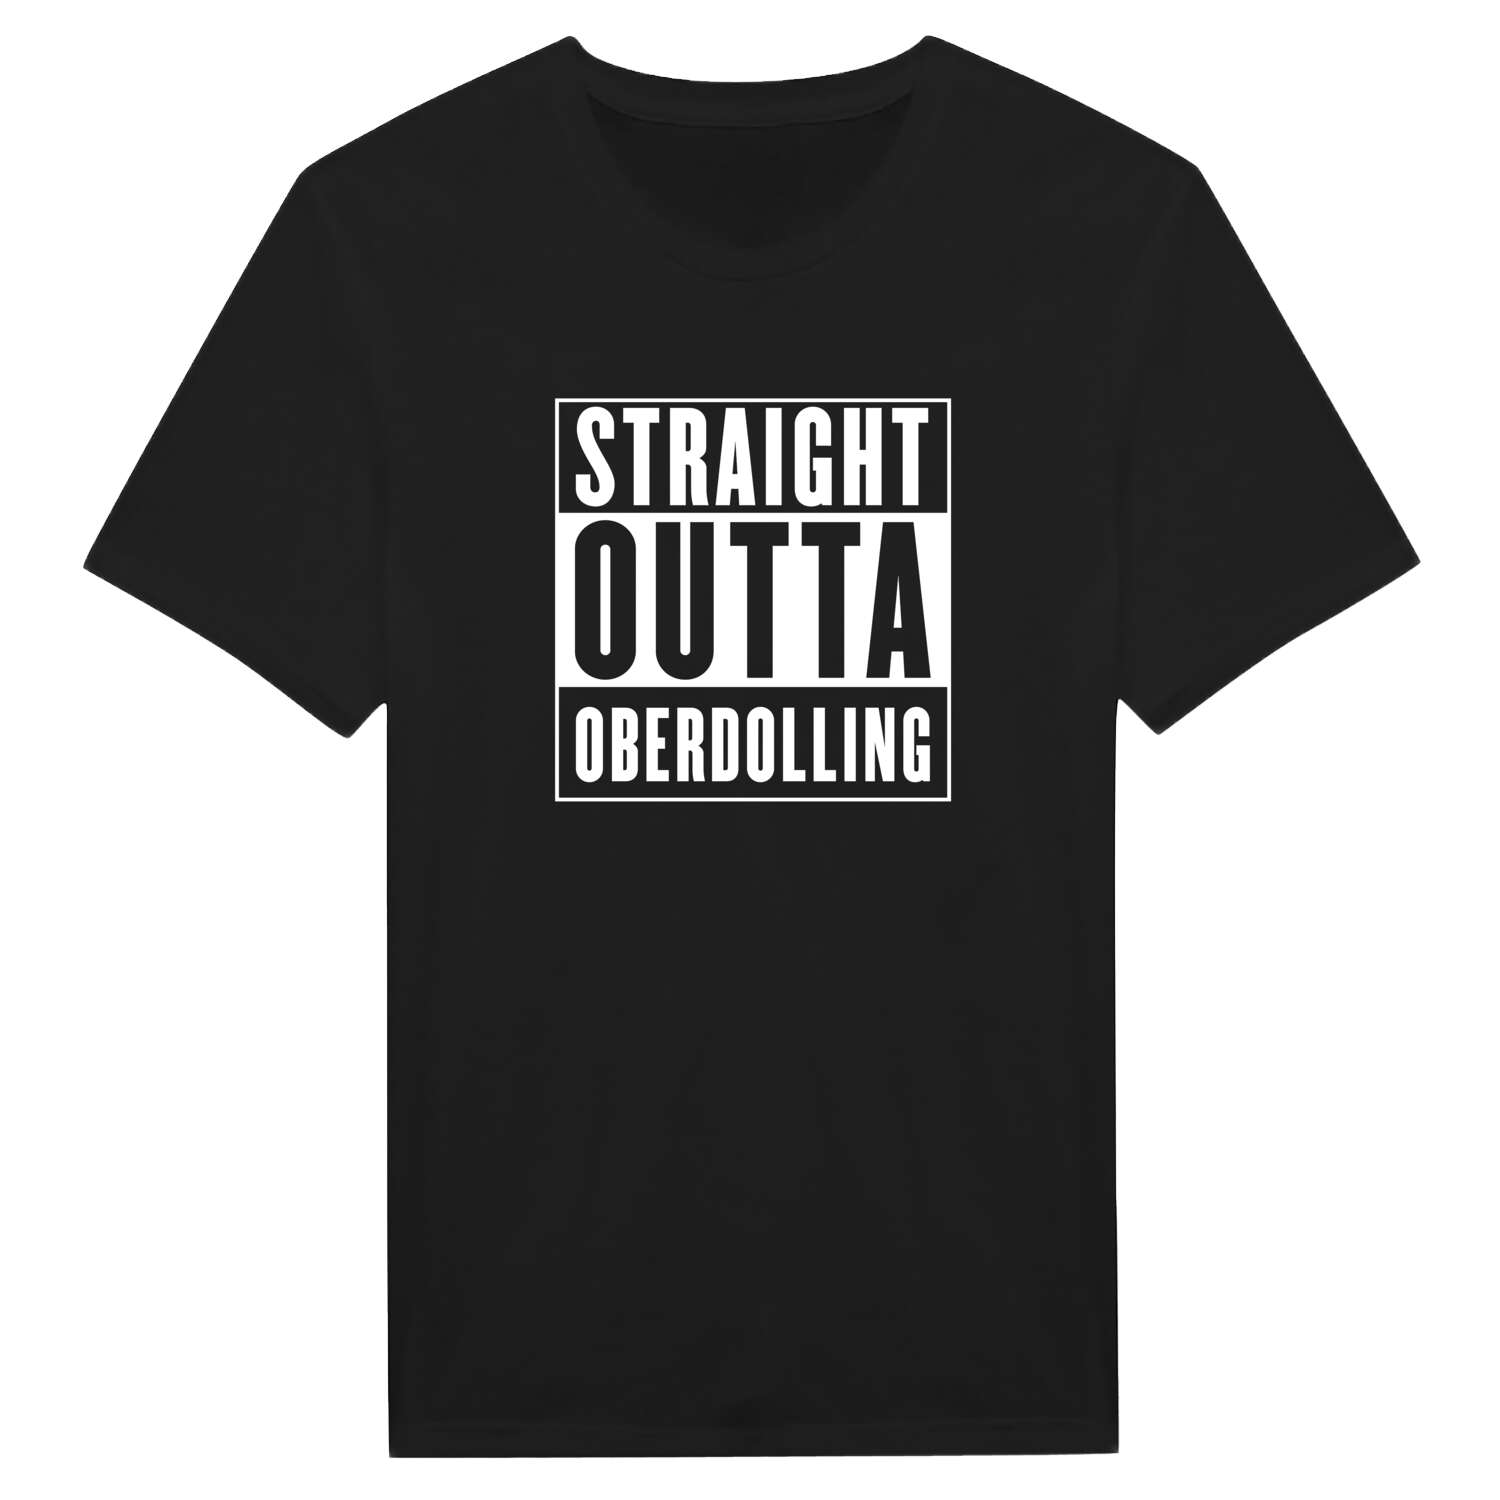 Oberdolling T-Shirt »Straight Outta«